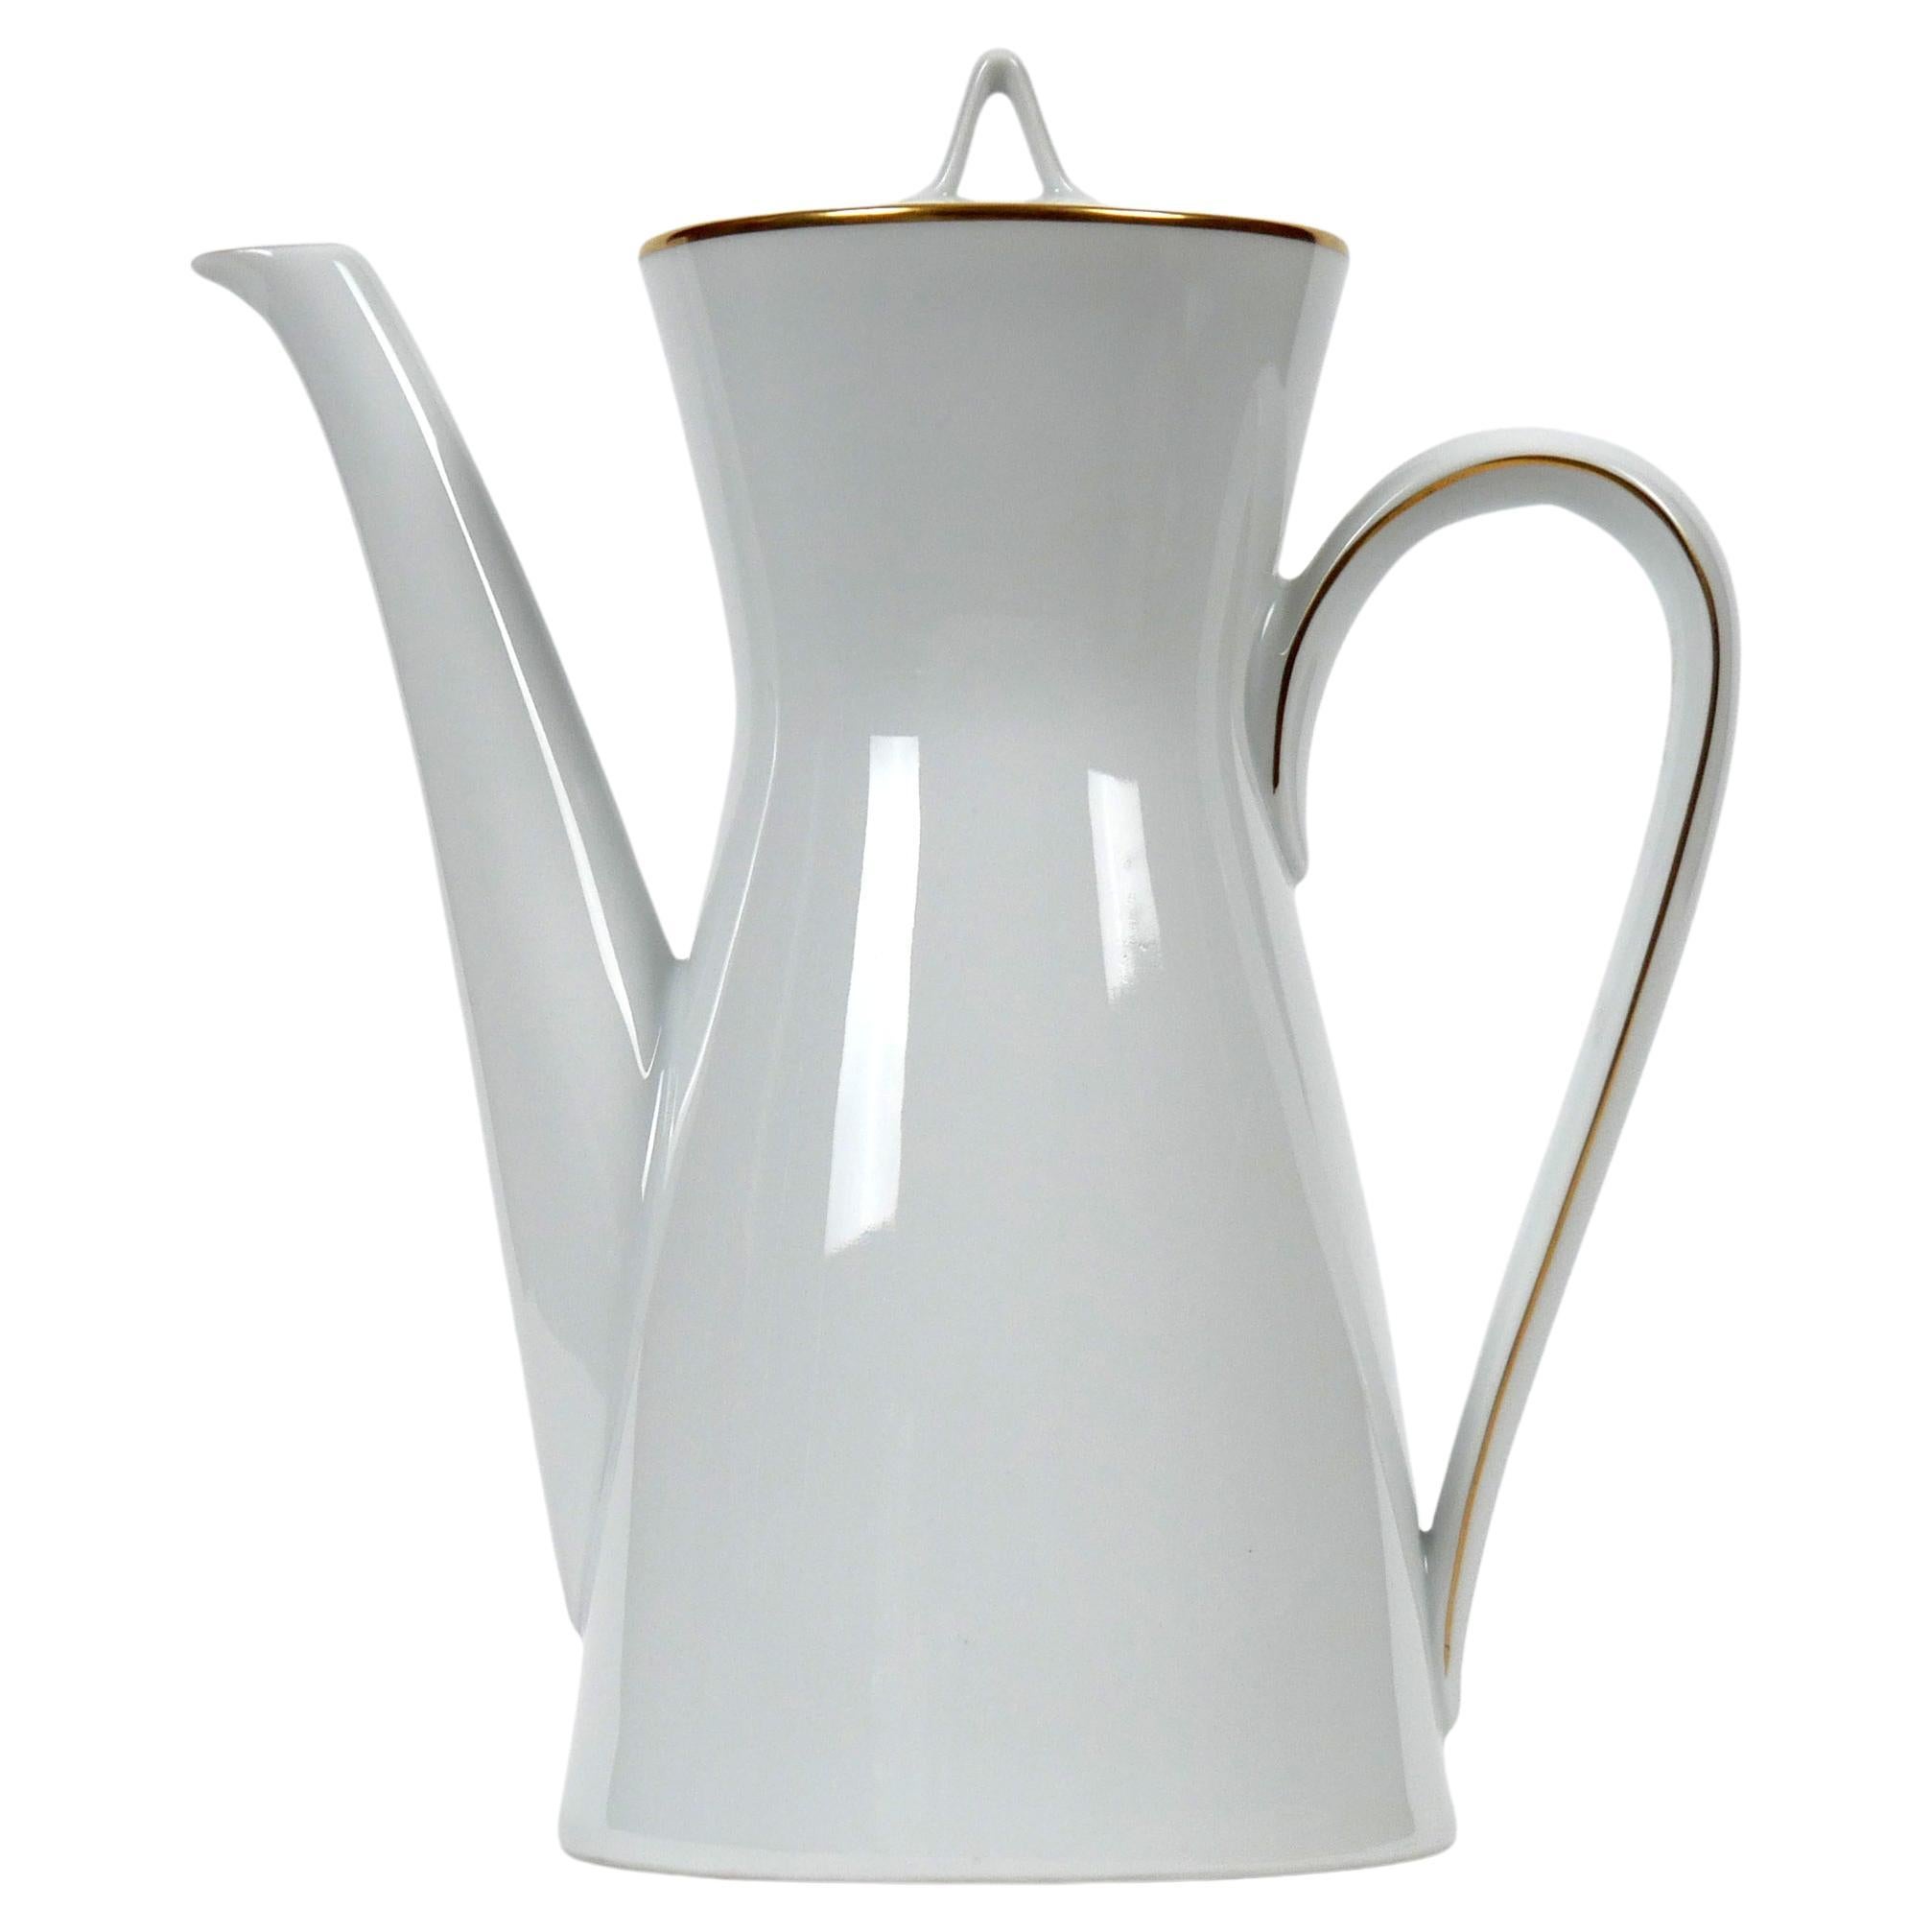 Raymond Loewy for Rosenthal ‘Form 2000' Coffee Pot, Designed 1954, White Ceramic